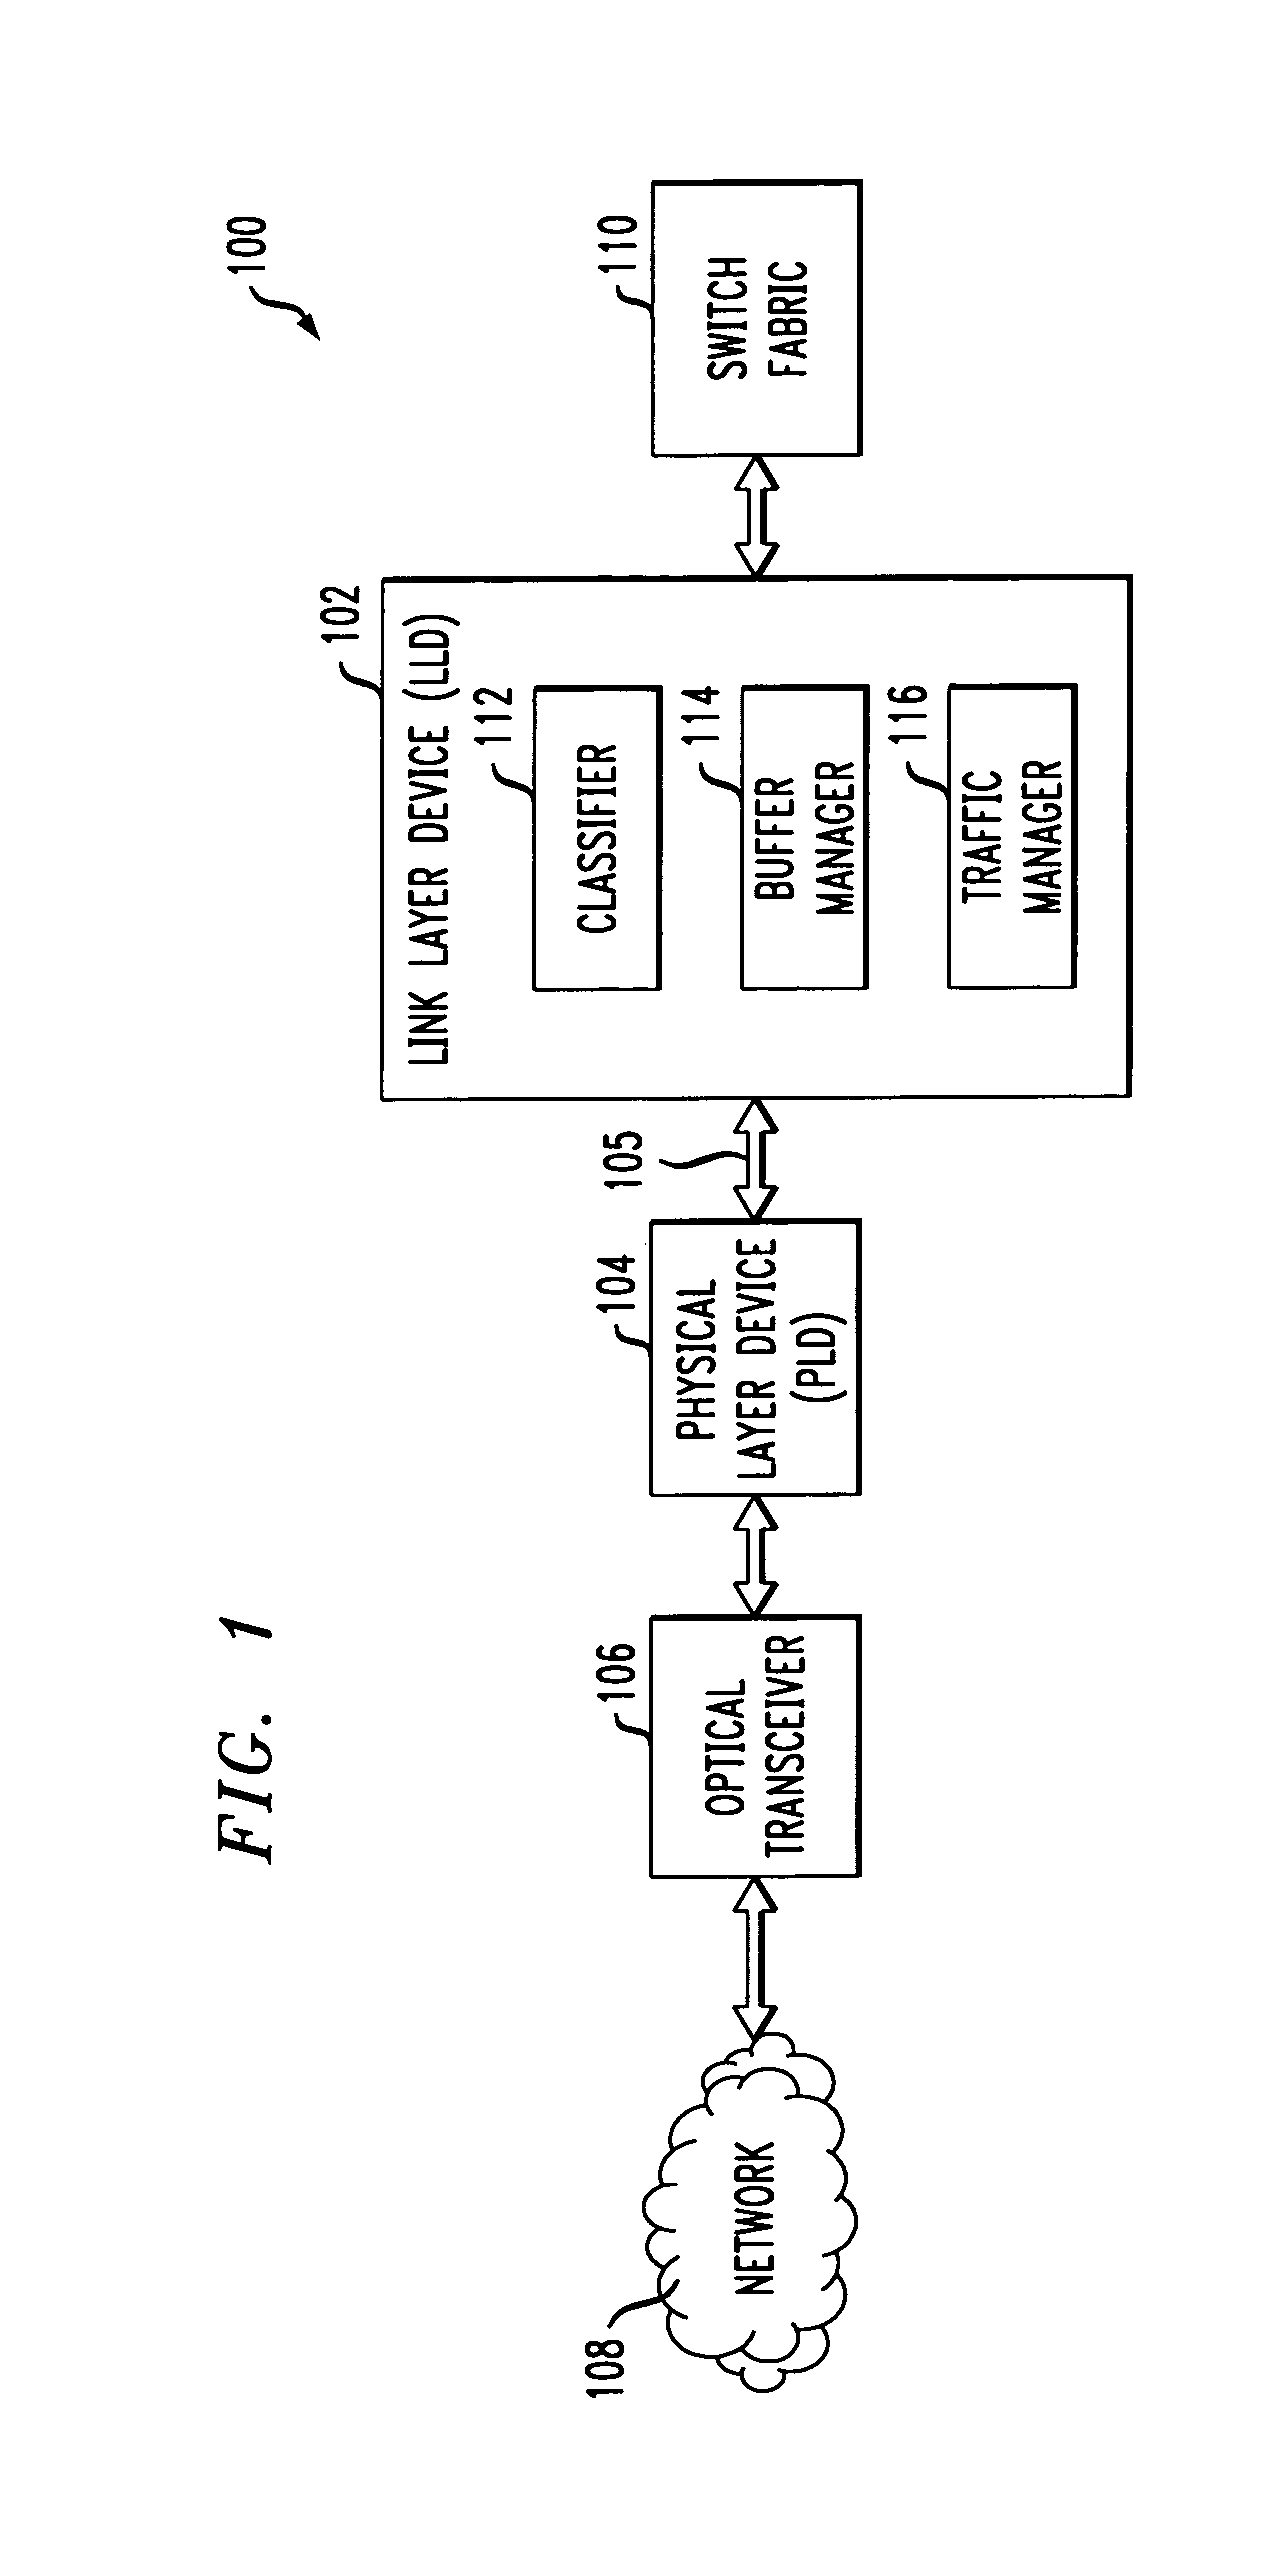 Network-based data traffic detection and control